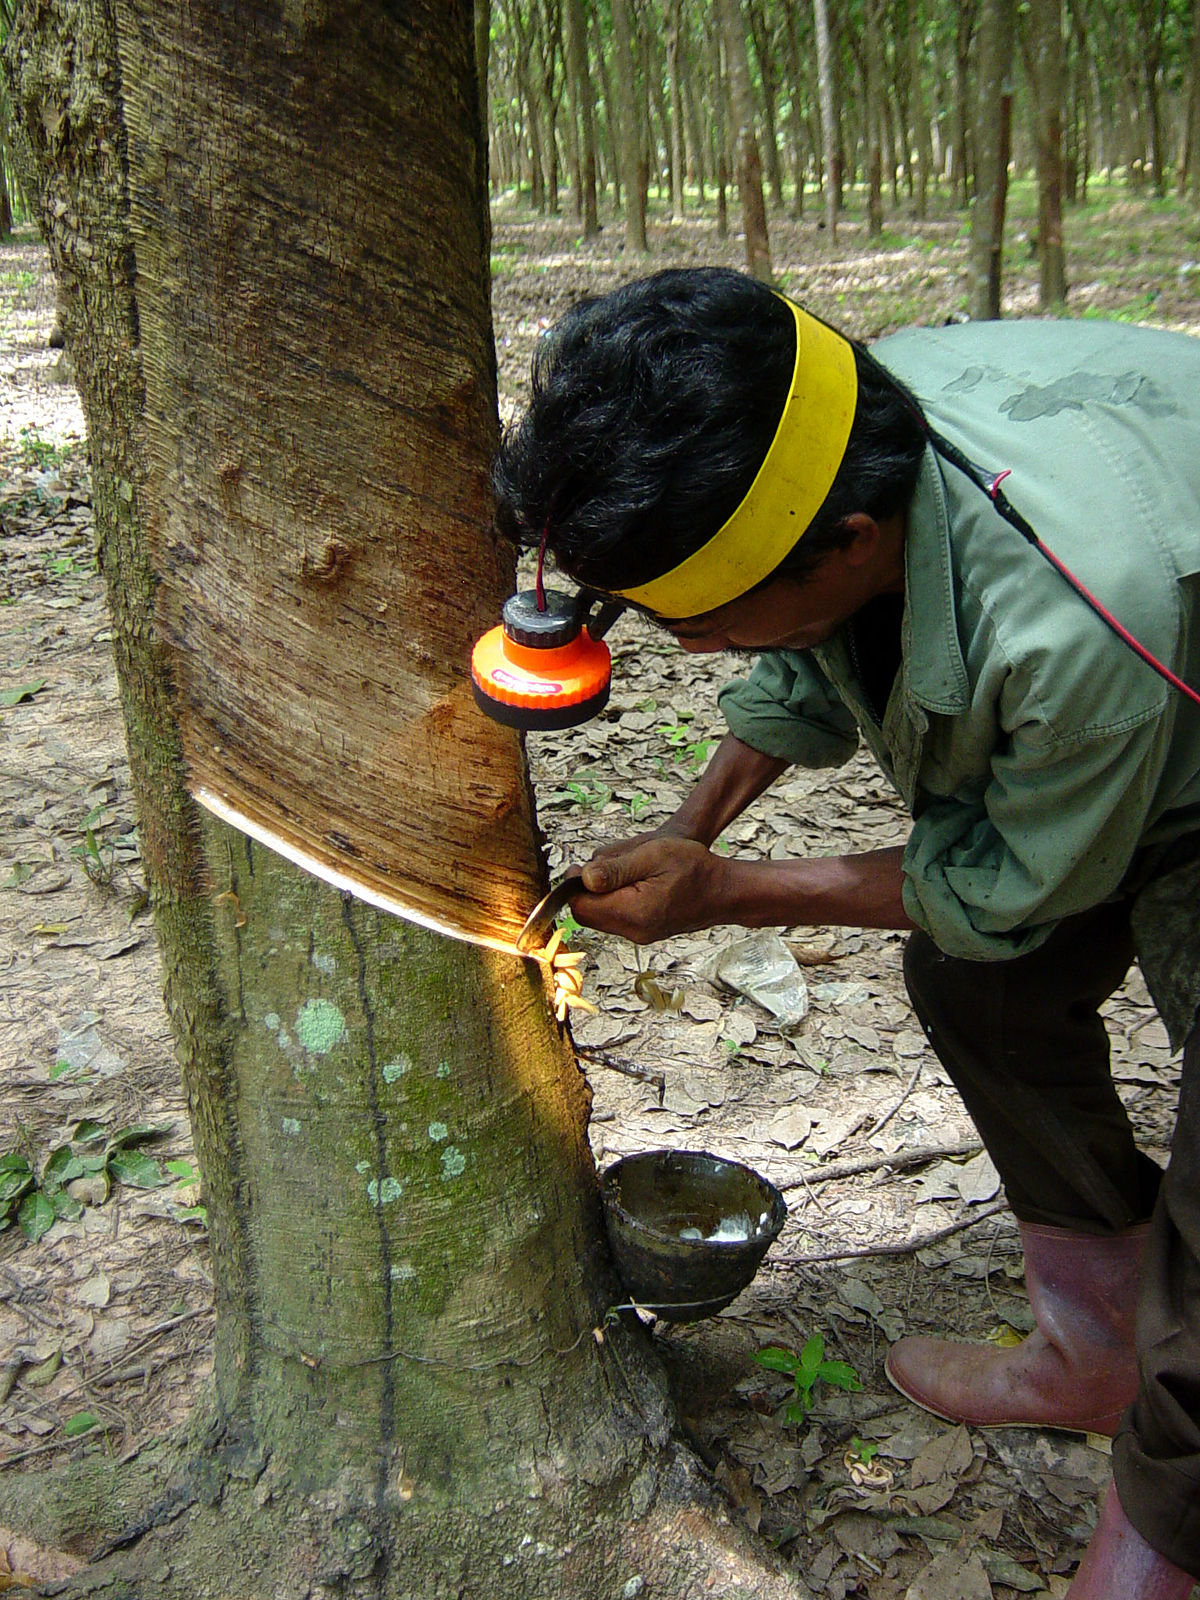 Lach Vrijwel Scorch File:Tapping a rubber tree in Thailand.JPG - Wikimedia Commons